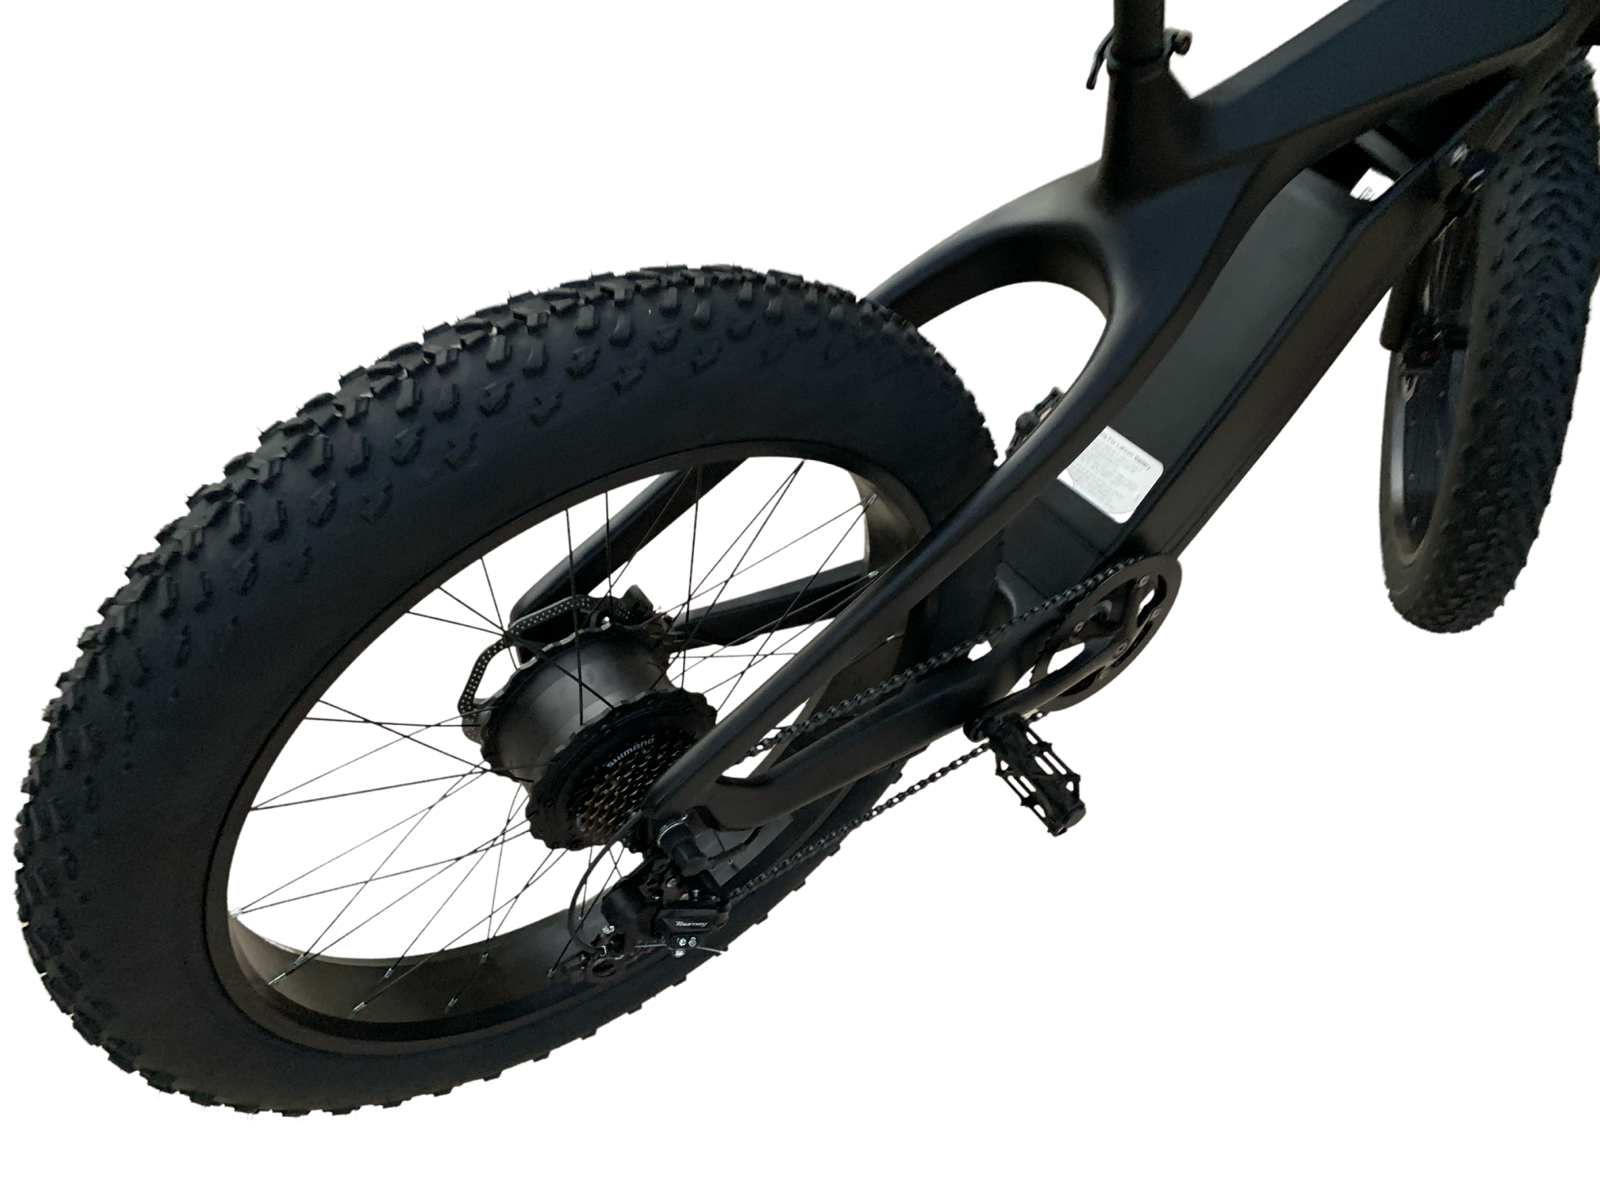 Carbon eBike from AB Elite - Rear wheel and hydraulics image